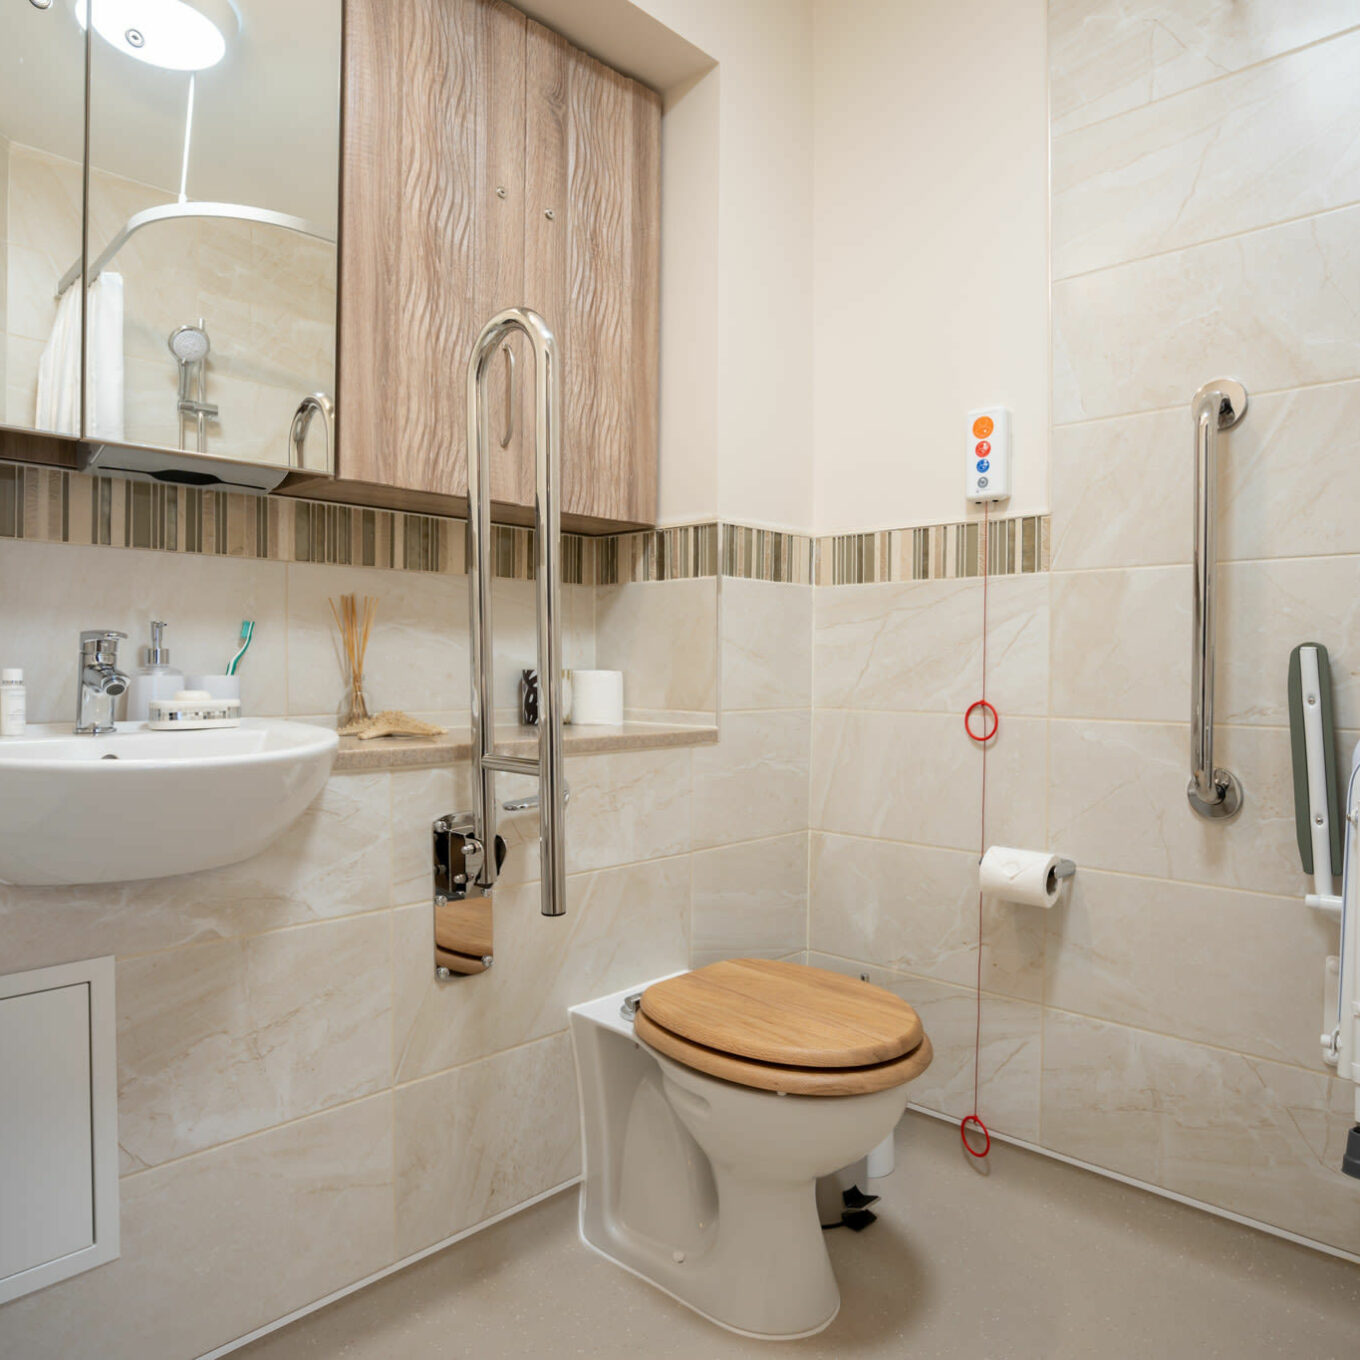 Toilet, sink and an emergency cord inside a bathroom at Elsyng Care Home in Enfield